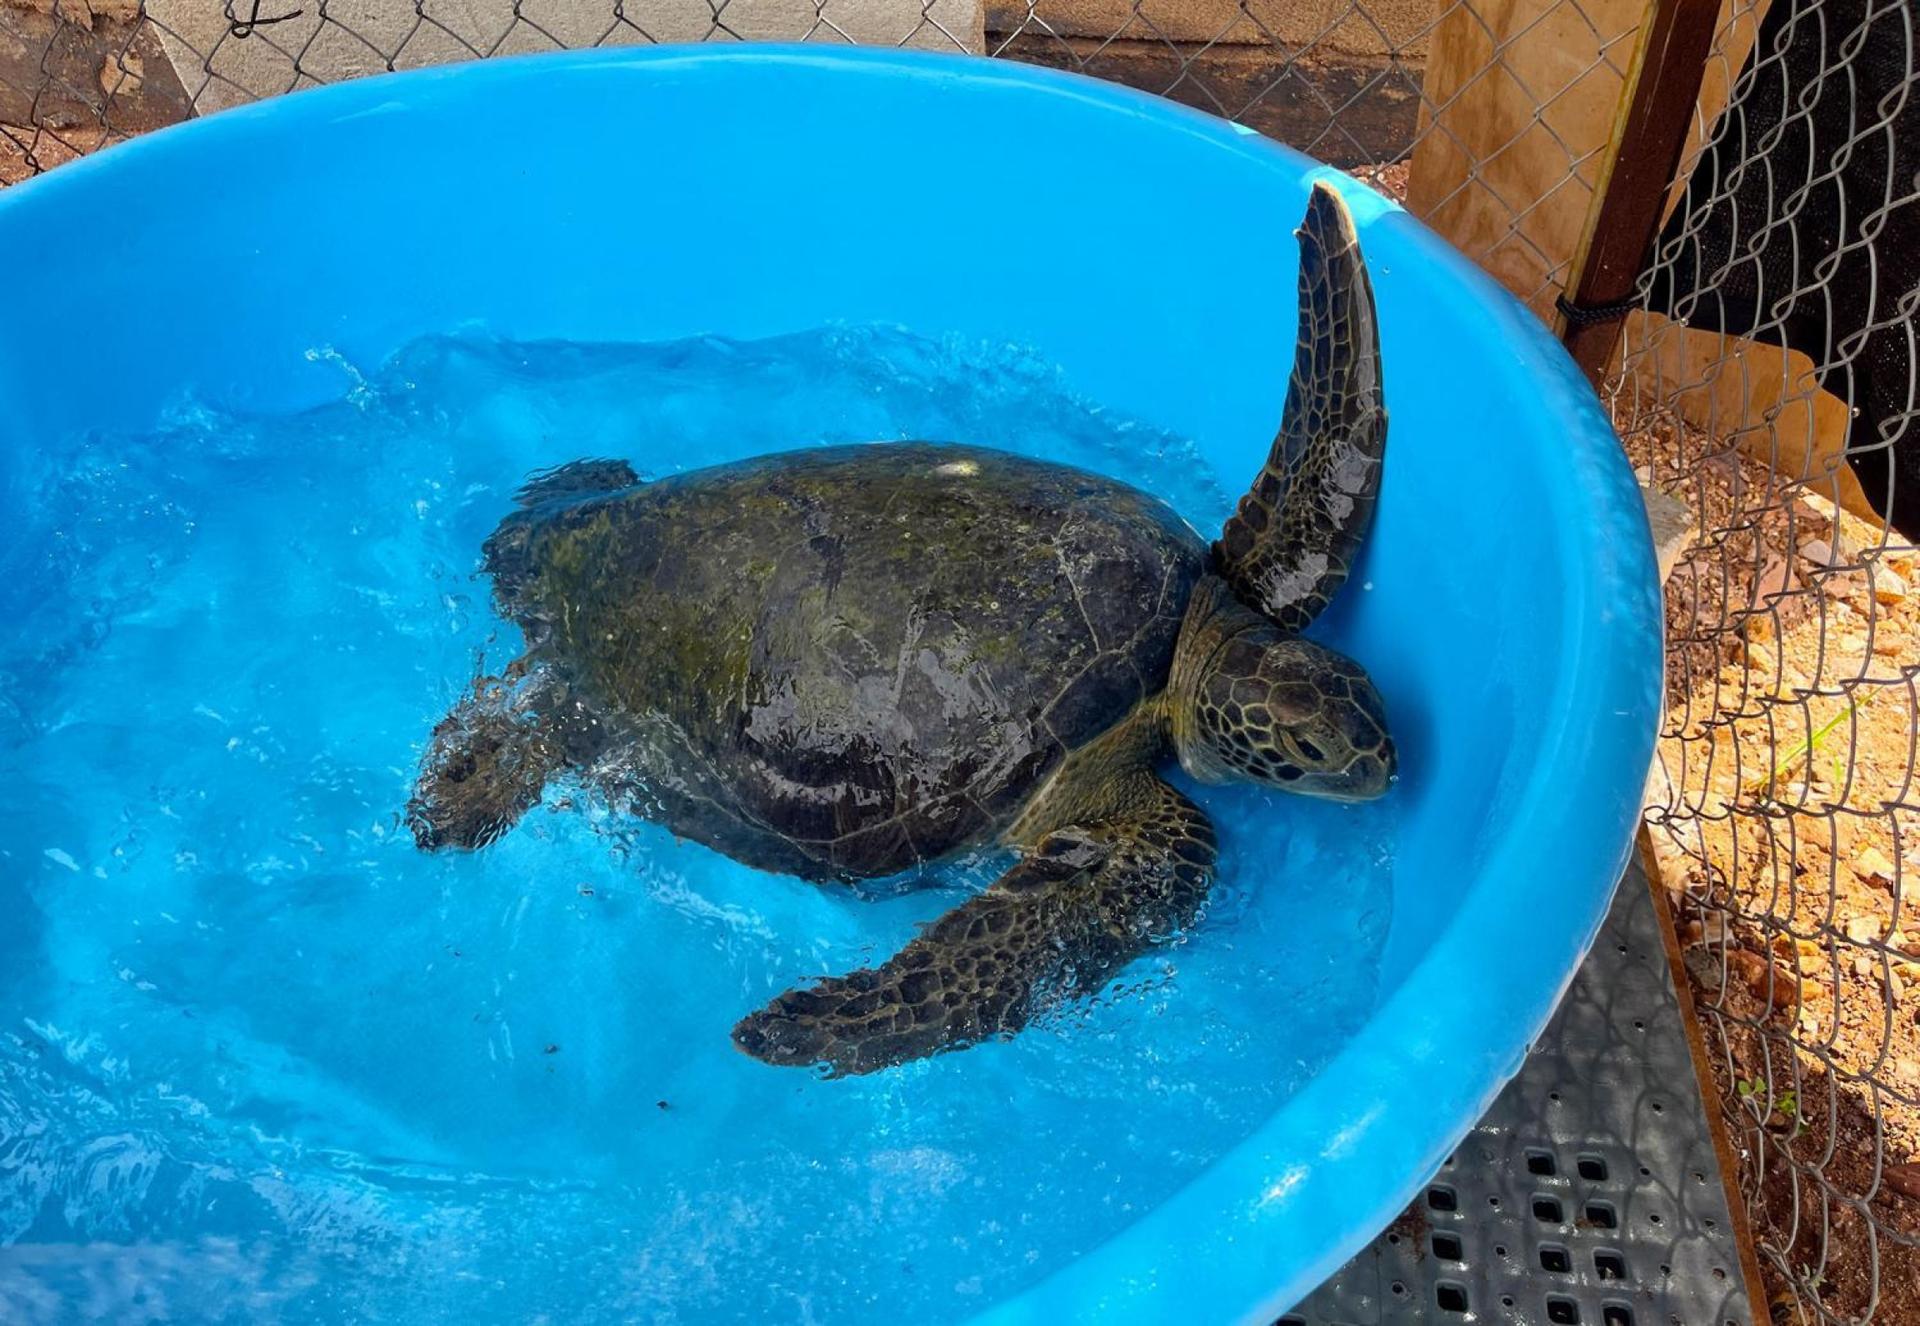 A young green sea turtle receives care from the CRRIFS team.